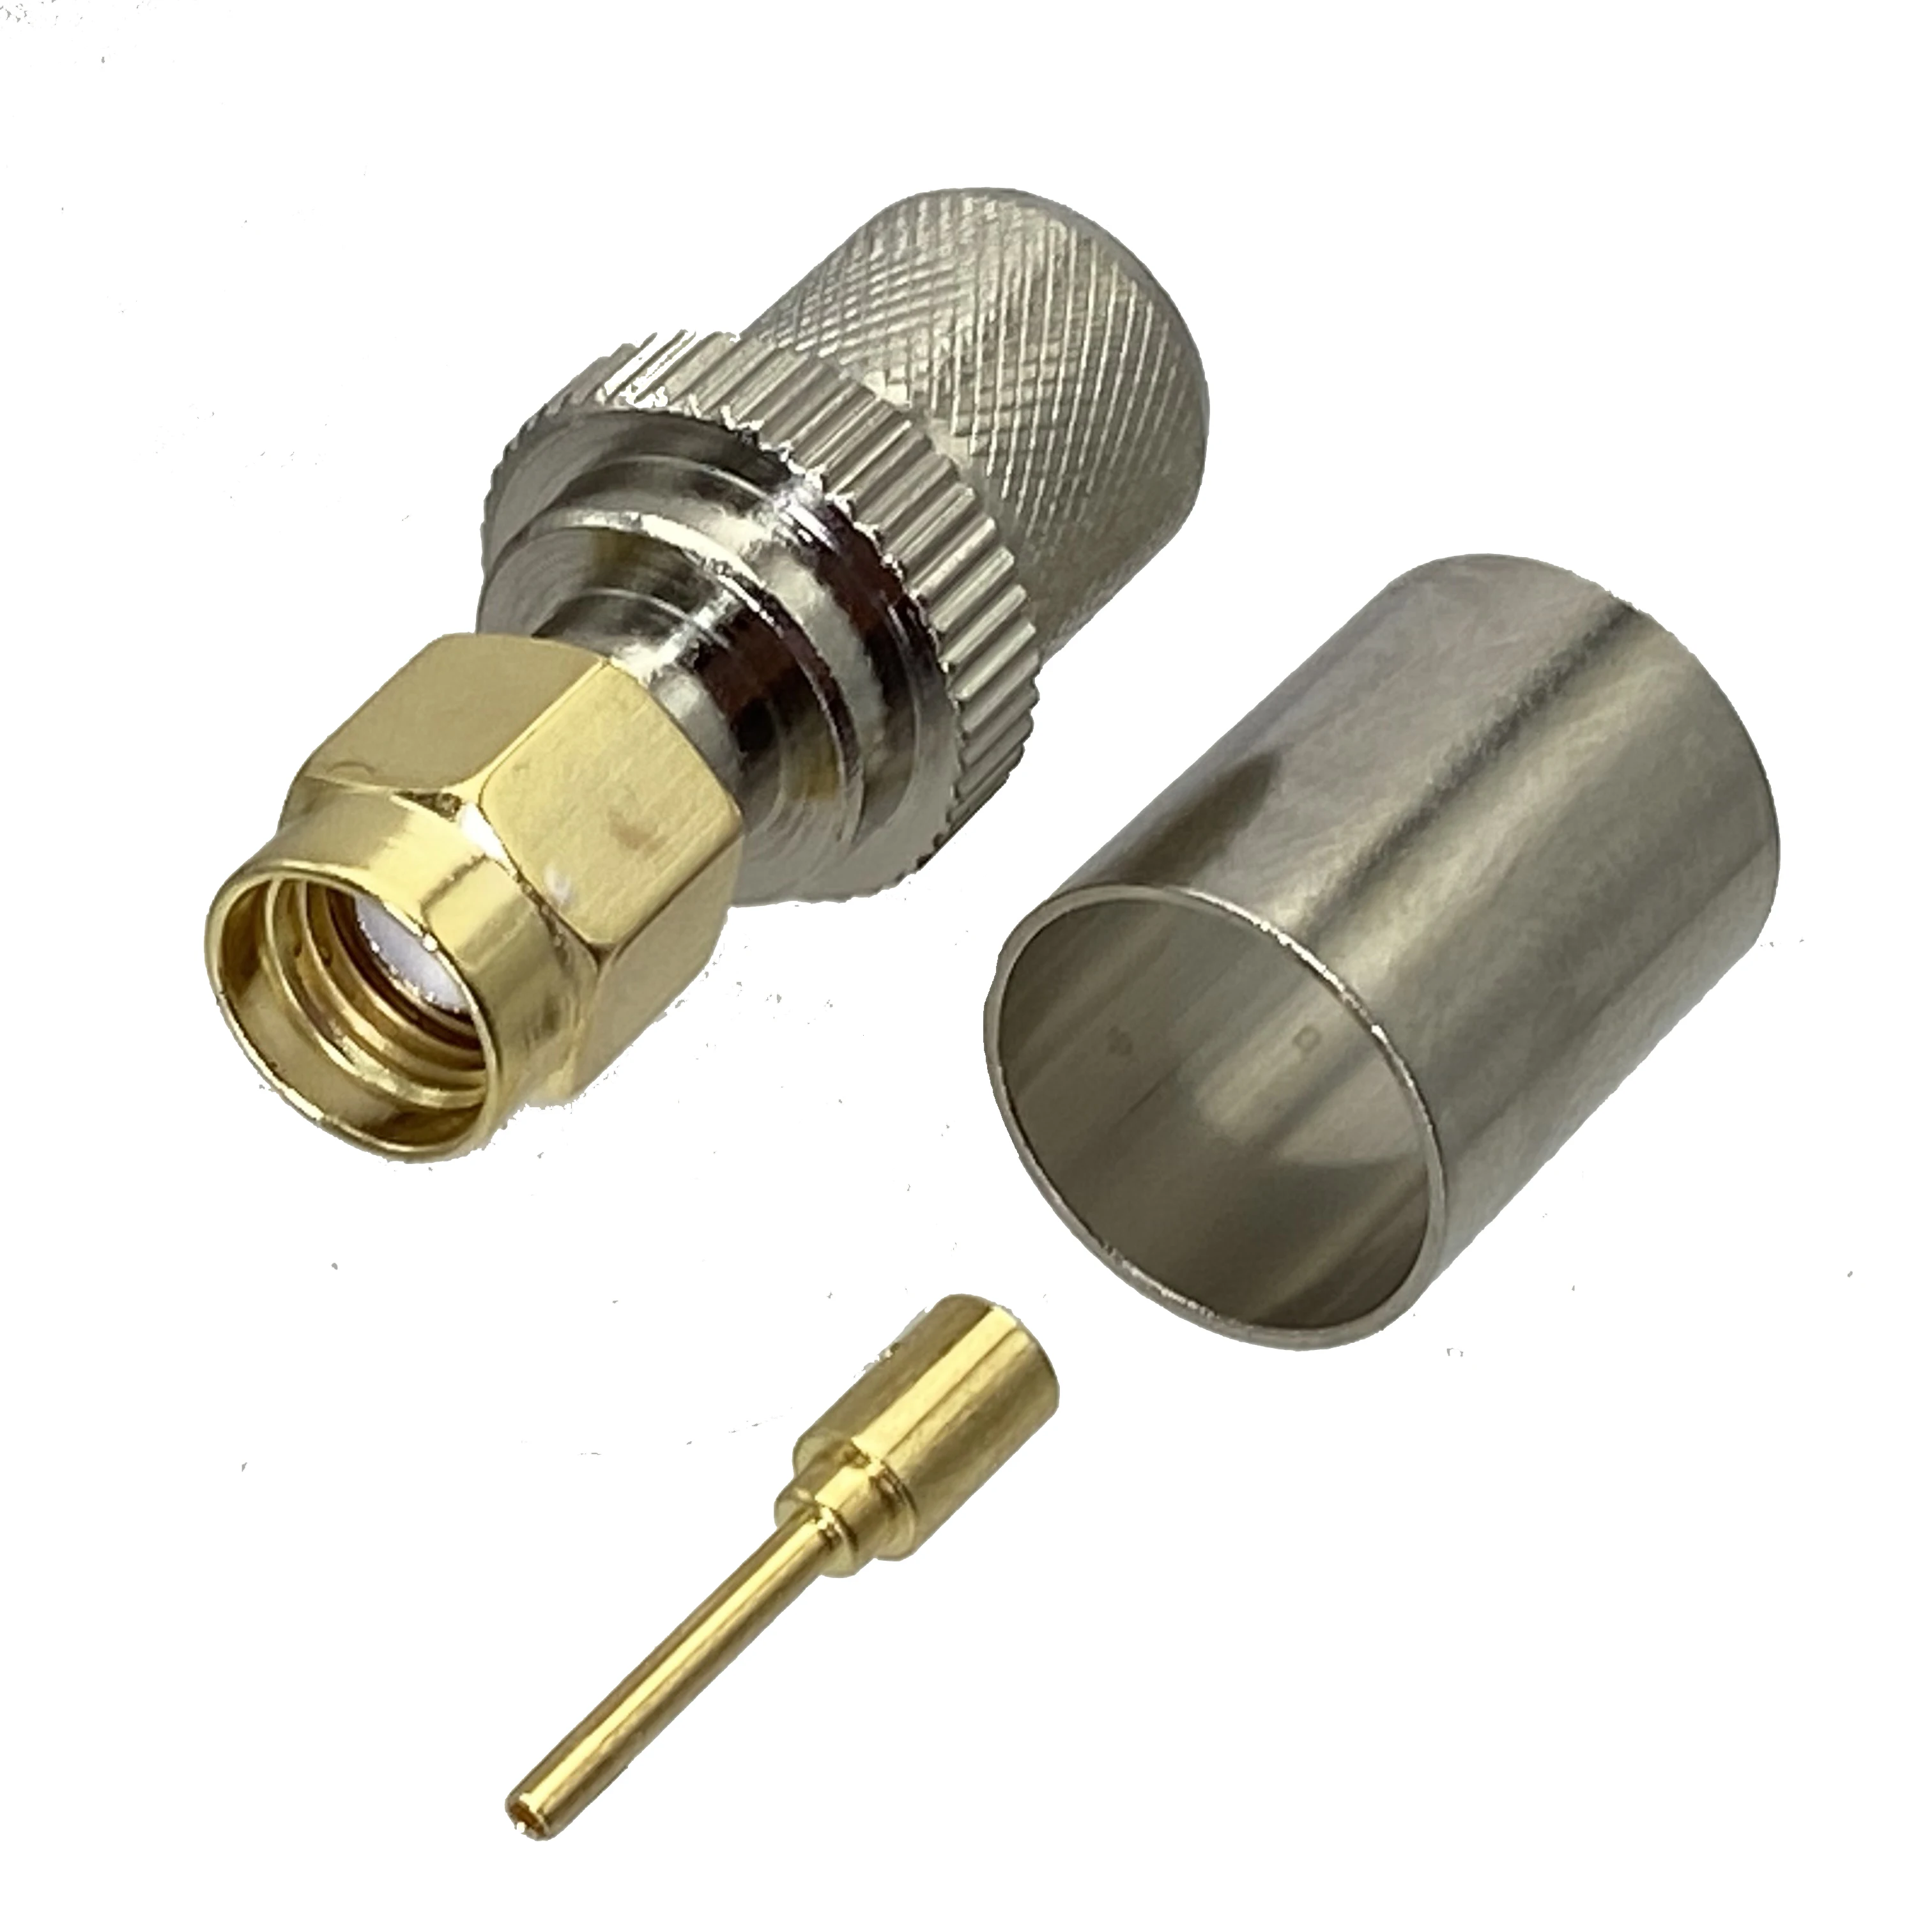 10pcs-connector-rp-sma-jack-male-cimp-for-rg8-lmr400-rg213-cable-straight-rf-coaxial-adapter-new-wire-terminals